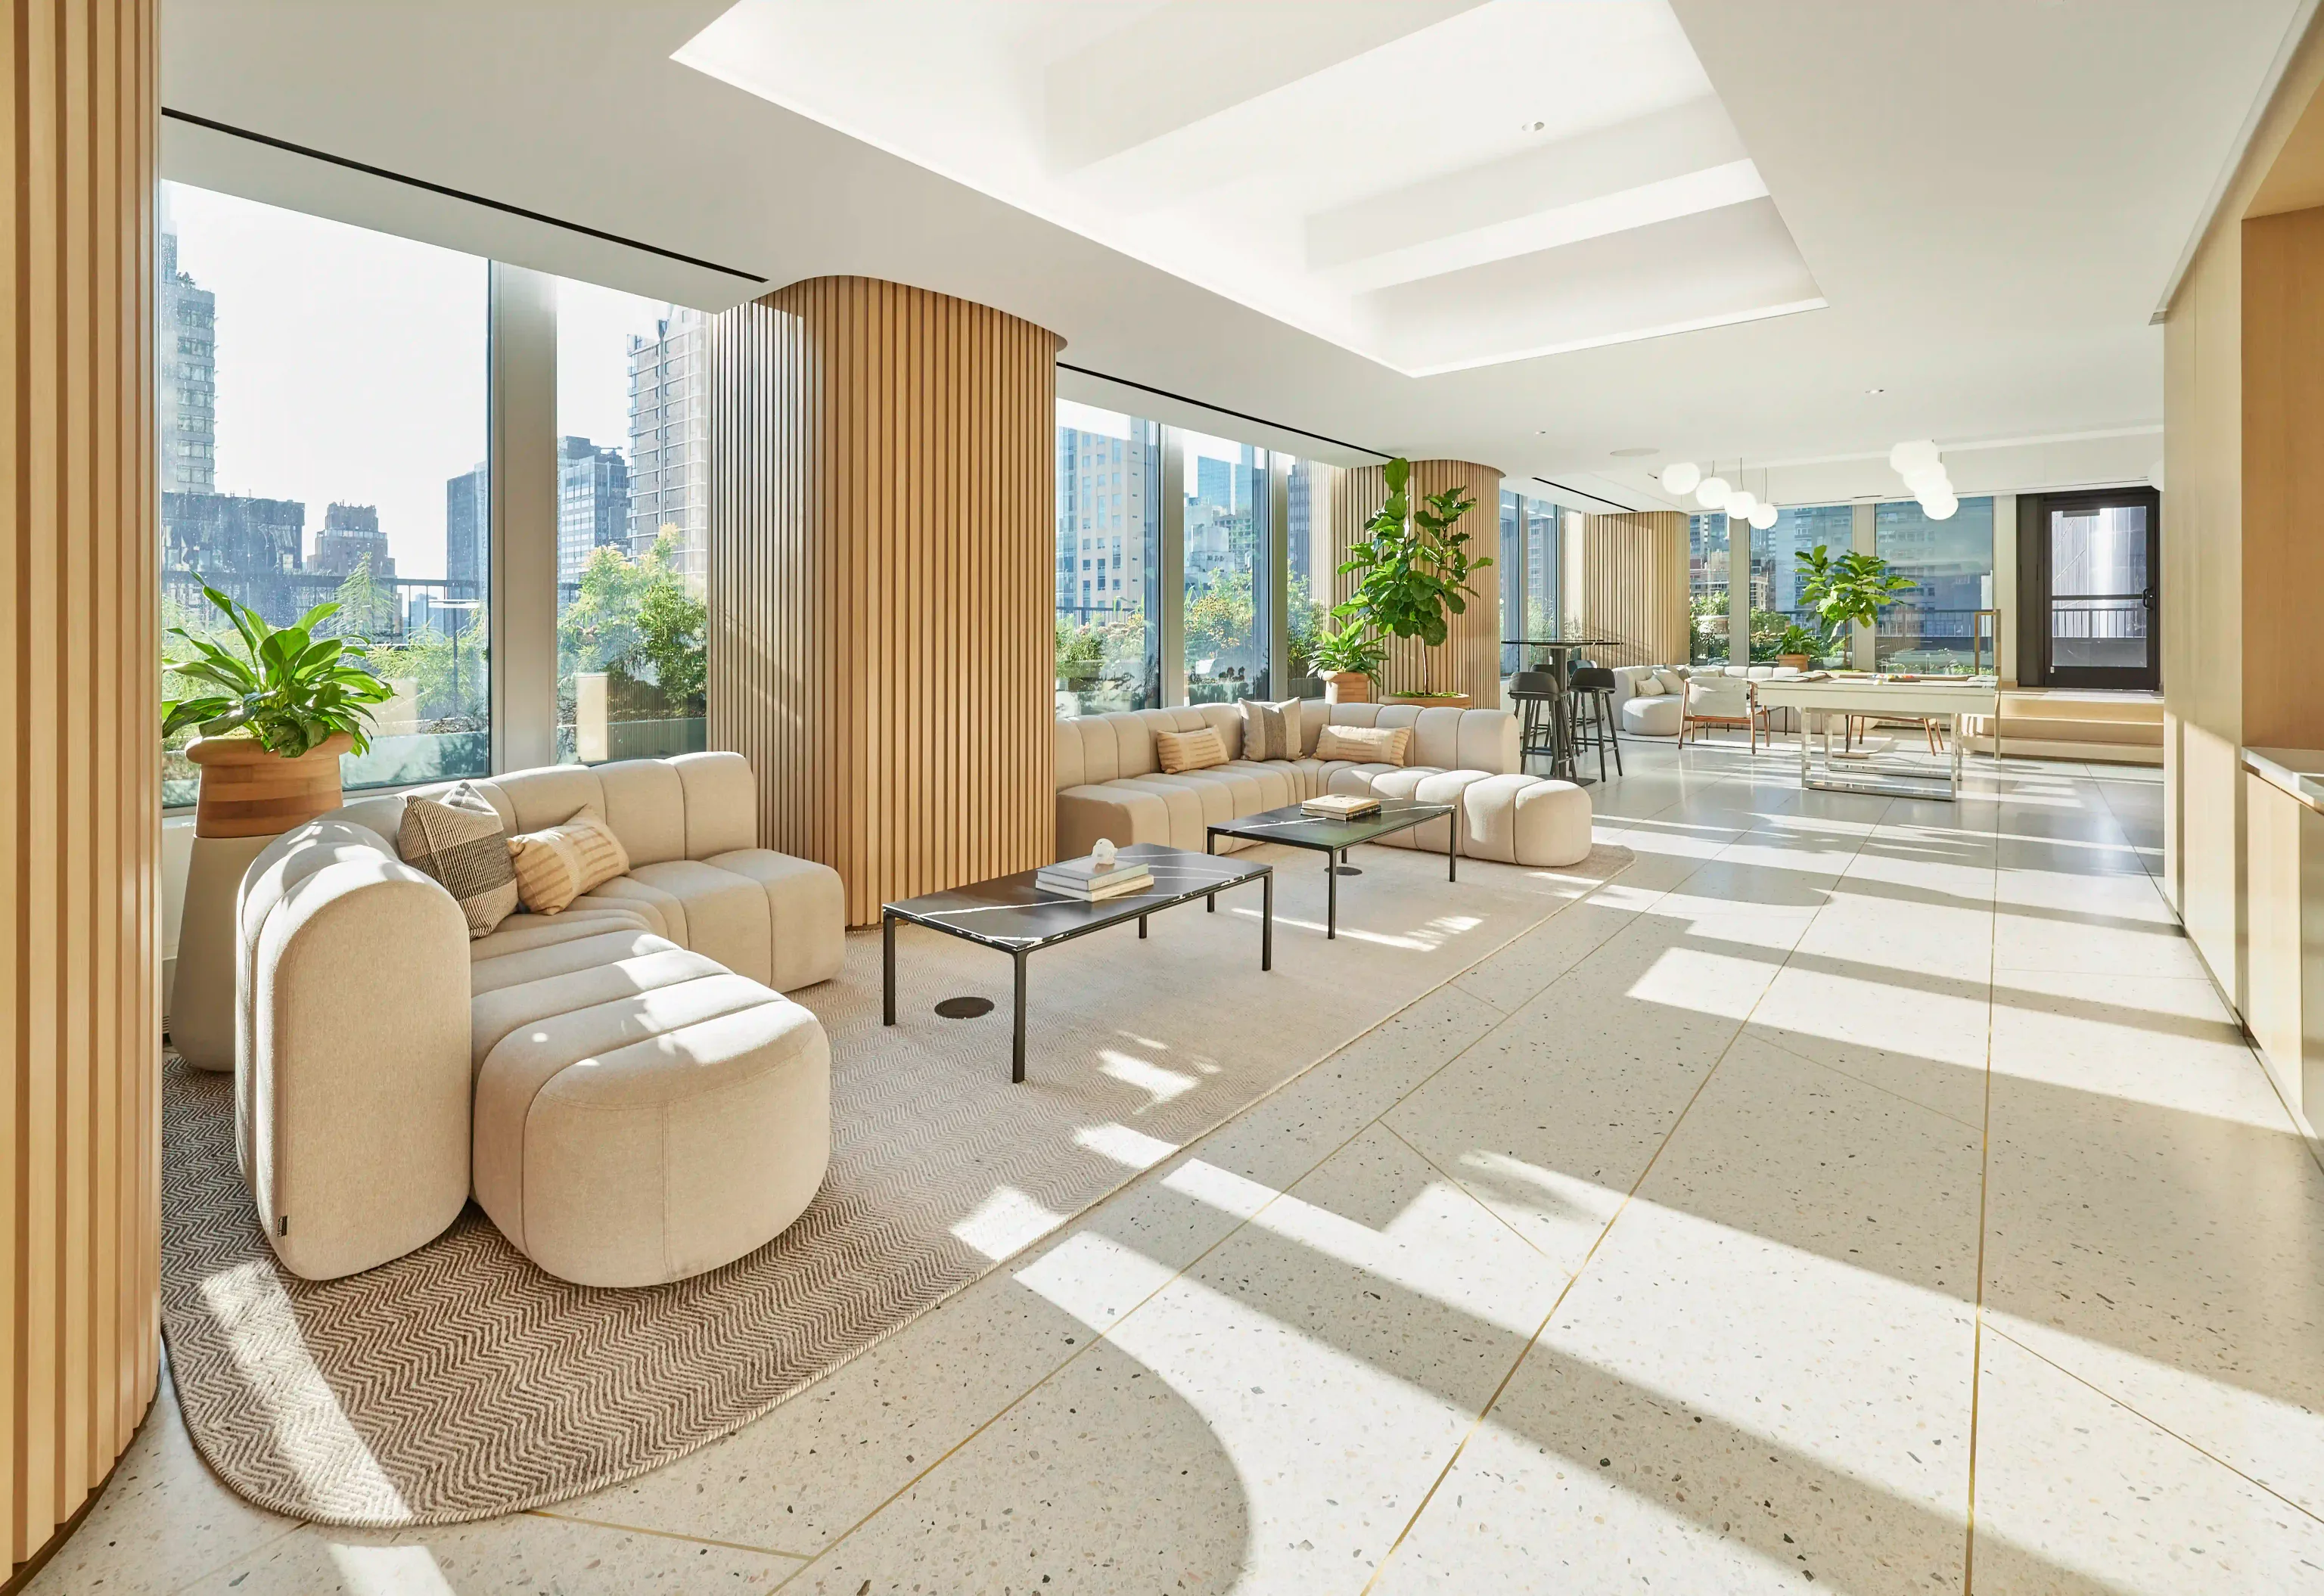 Contemporary lounge and dining area with expansive windows showcasing cityscape.